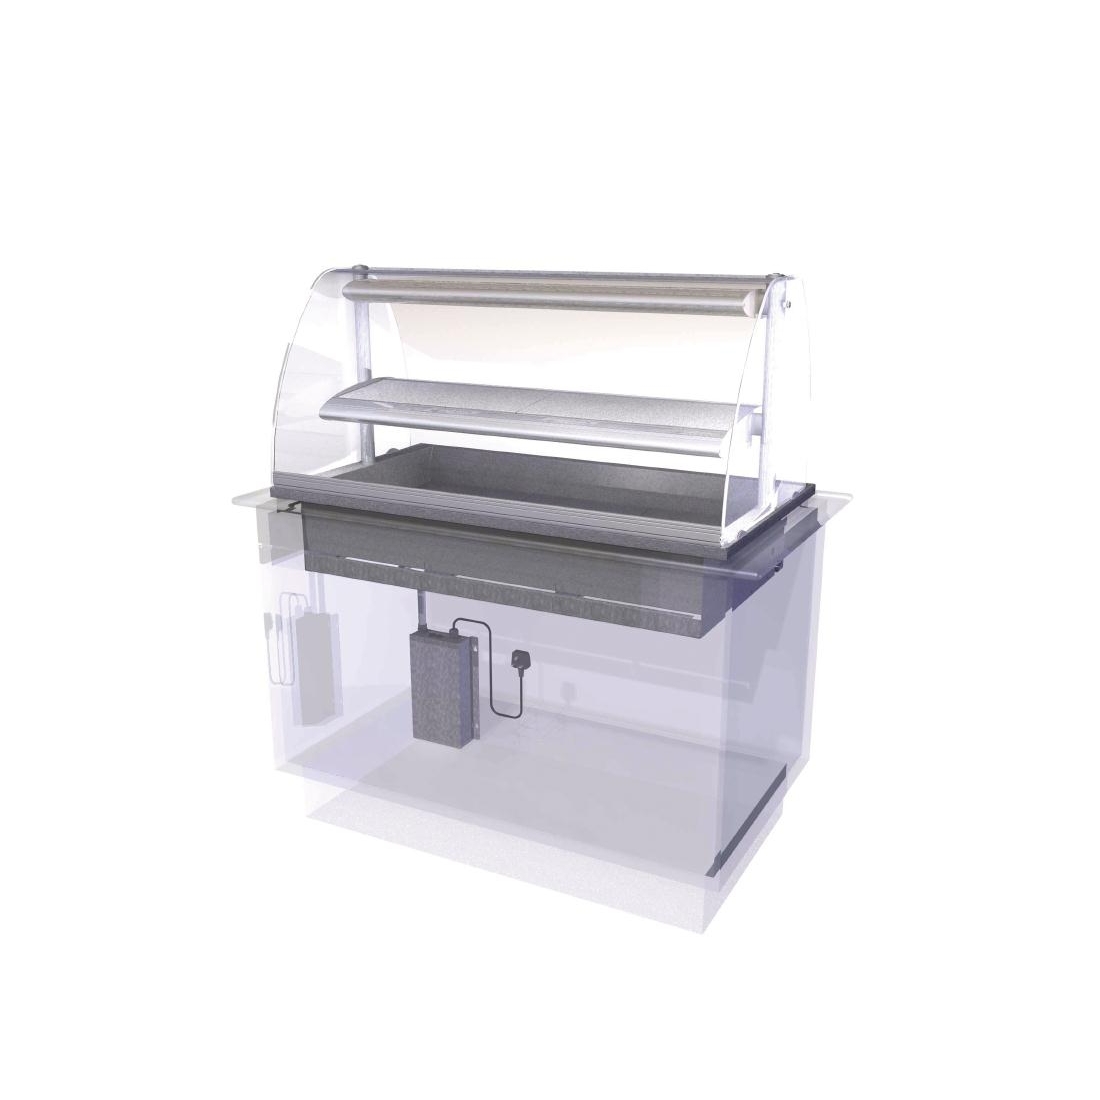 Designline Drop In Heated Serve Over Counter HDL4